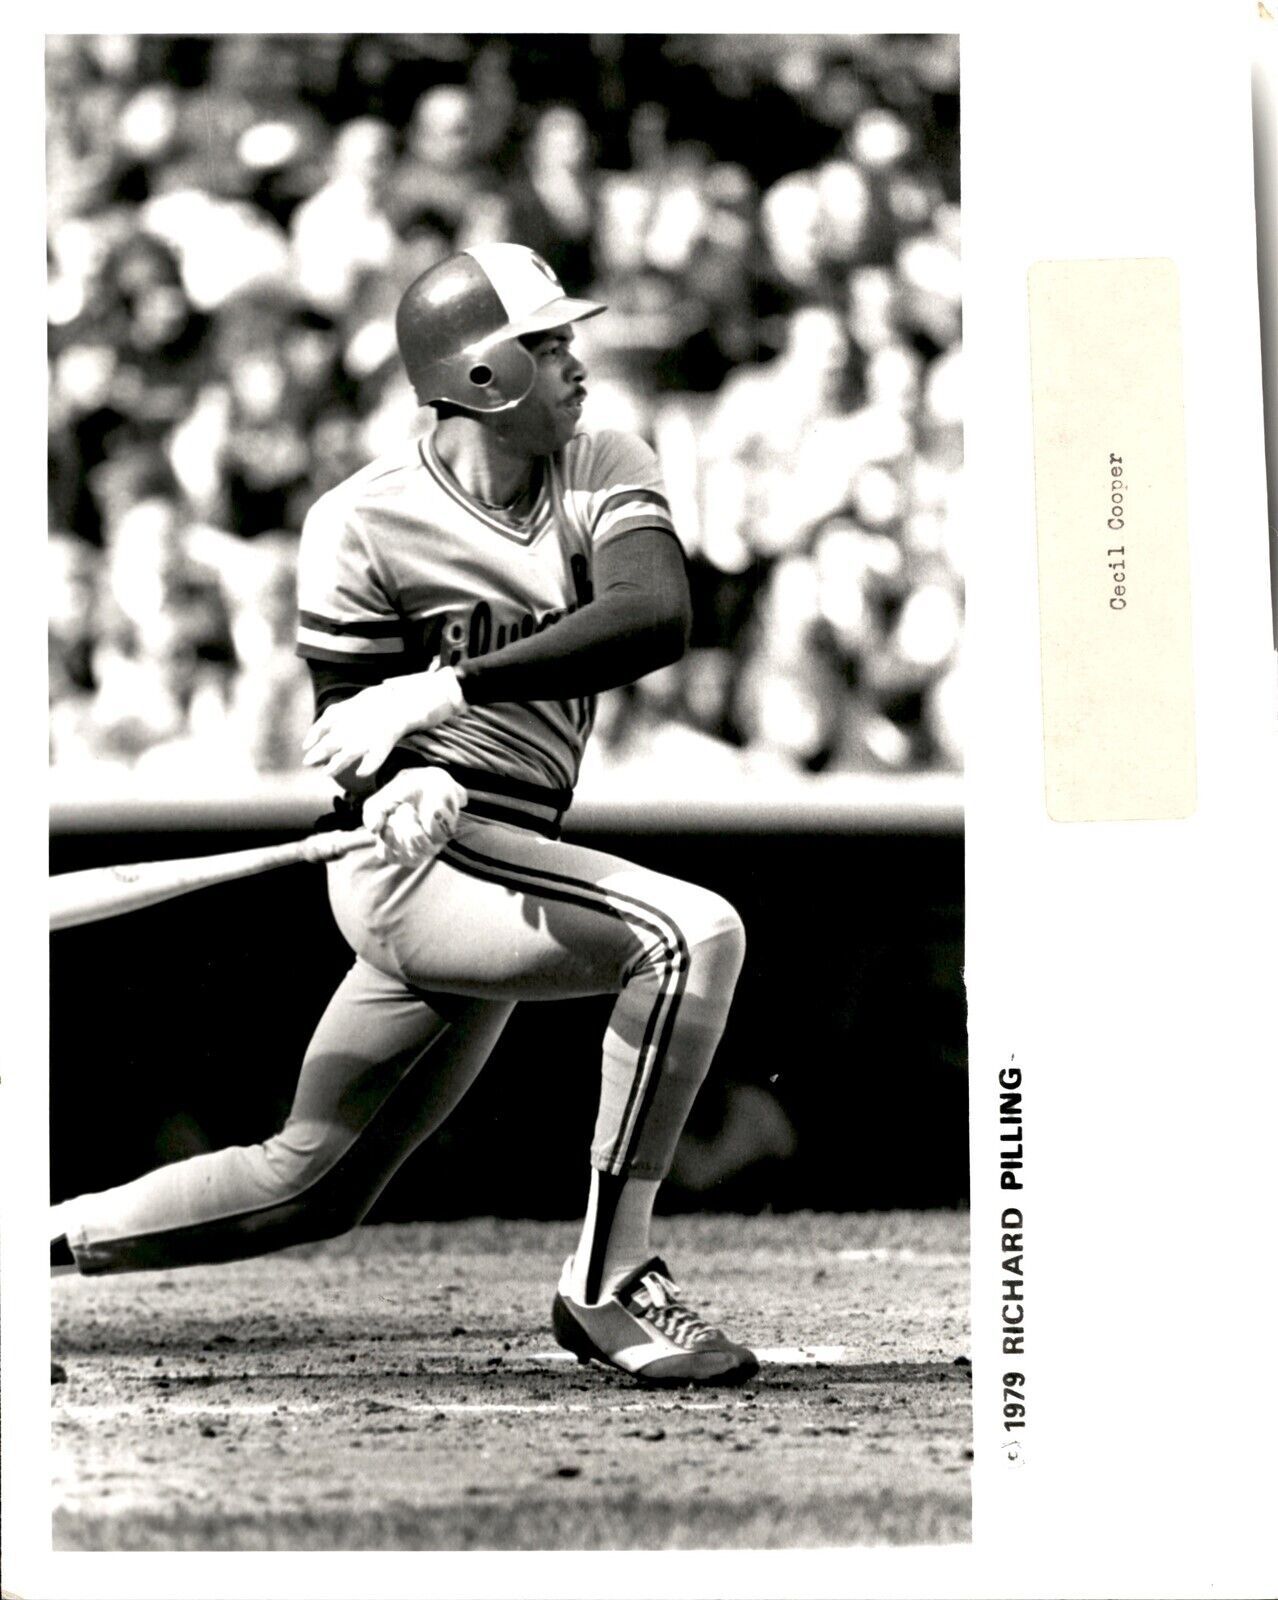 LD324 1979 Orig Richard Pilling Photo CECIL COOPER MILWAUKEE BREWERS 5x ALL-STAR